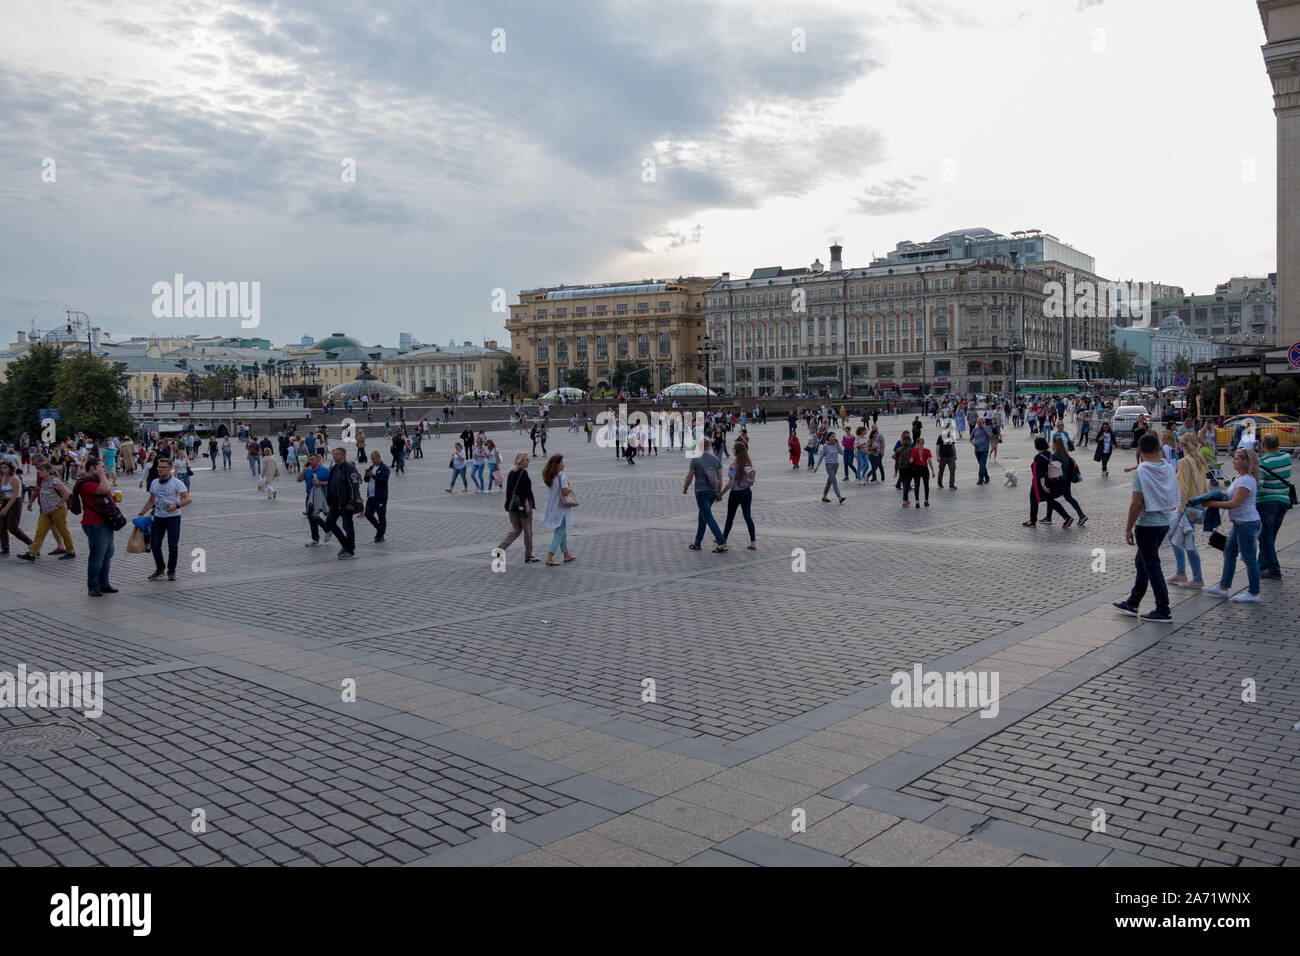 People walking in a town square in Moscow Stock Photo